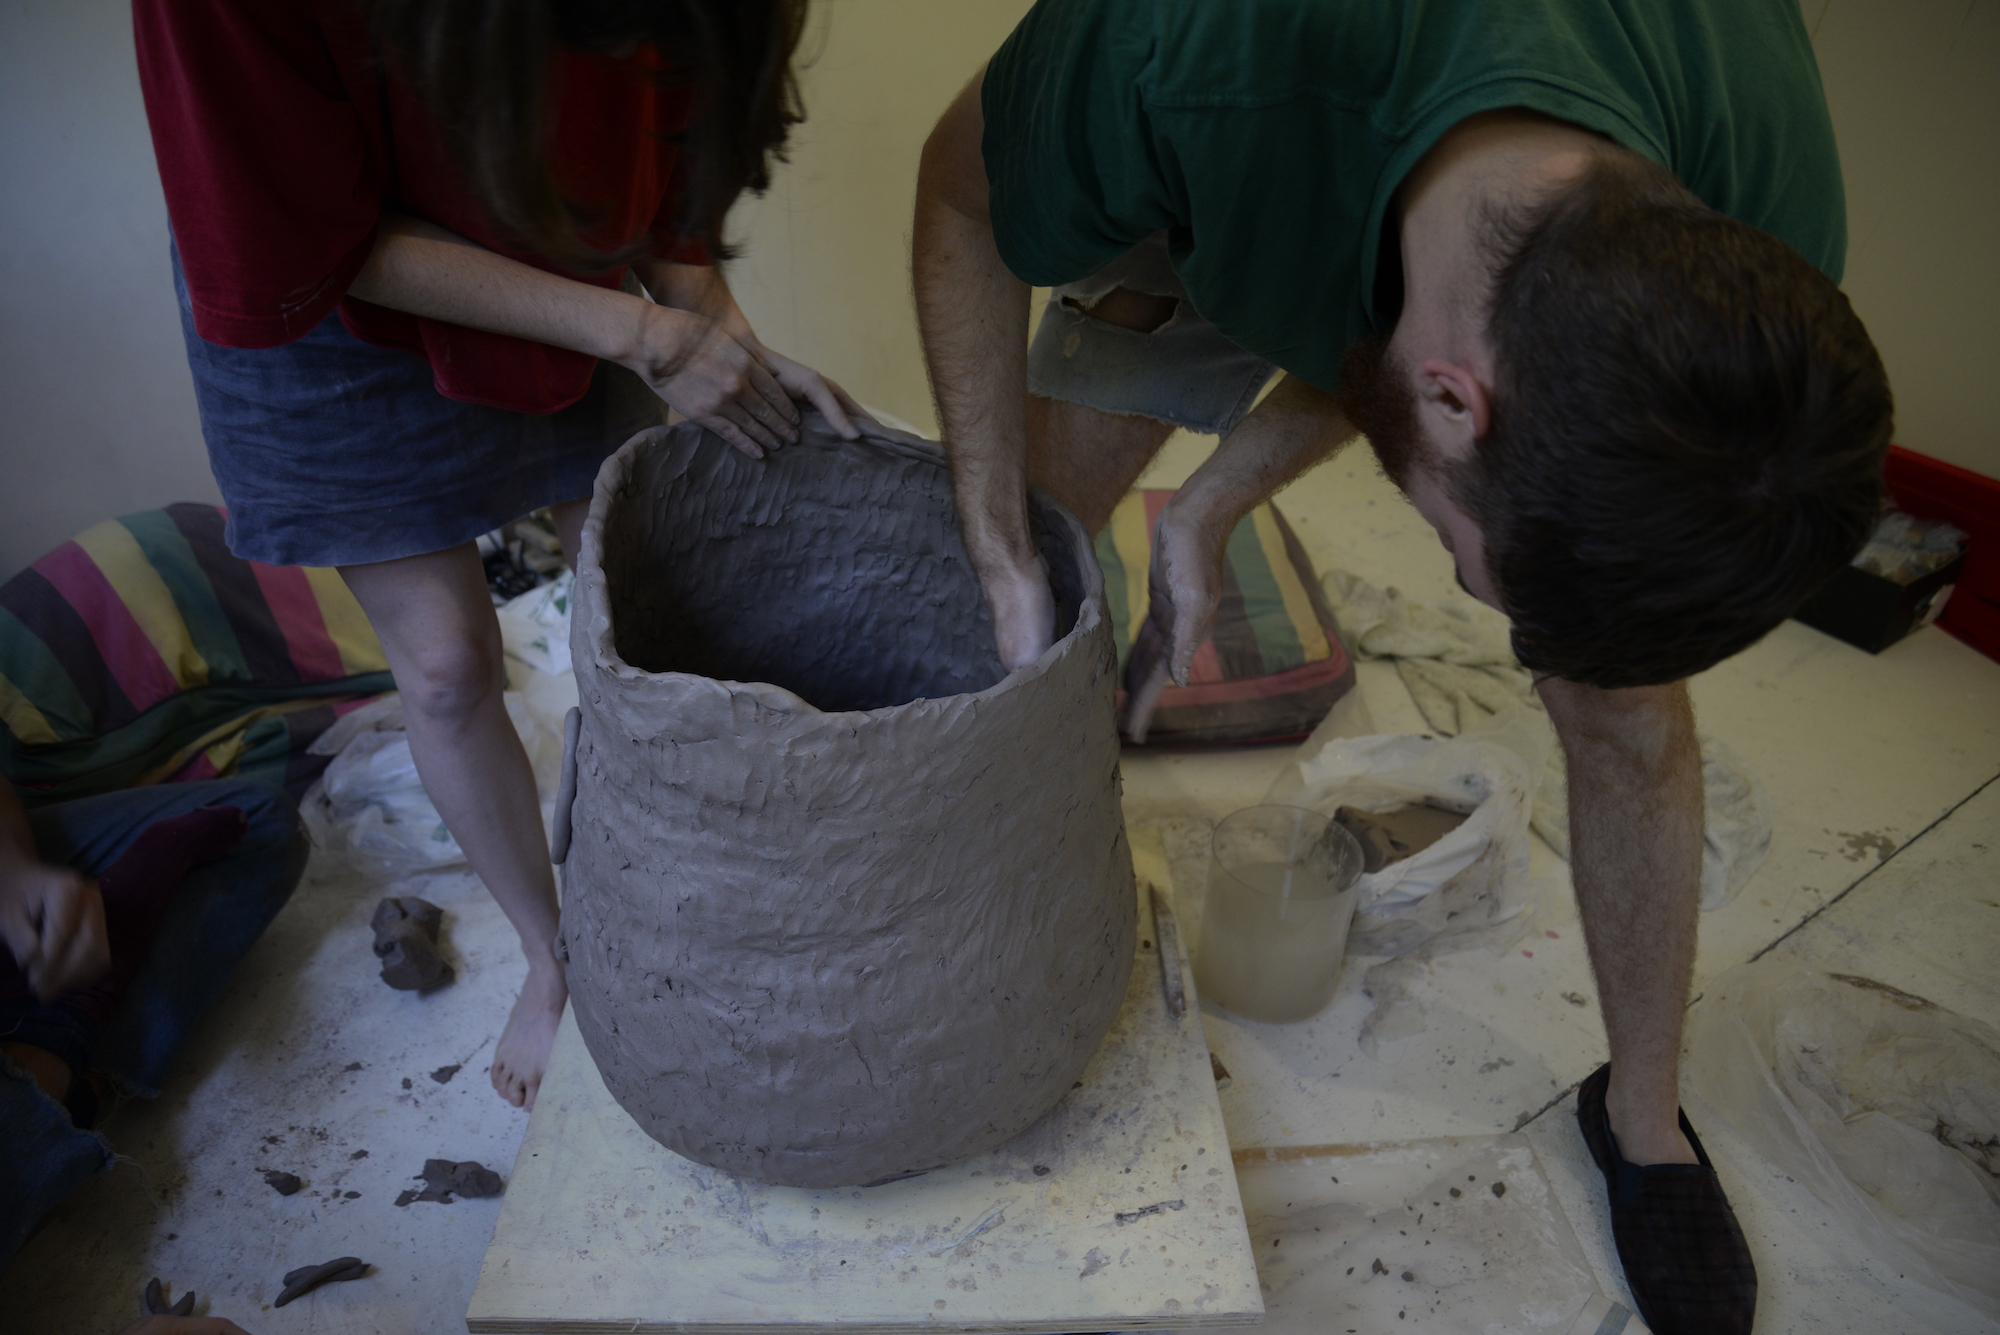   Vessel Construction Workshop , collaborative work with Bridie Gillman and Kylie Spear. Hosting workshops with 6 people attempting to build a clay vessel as a group. 